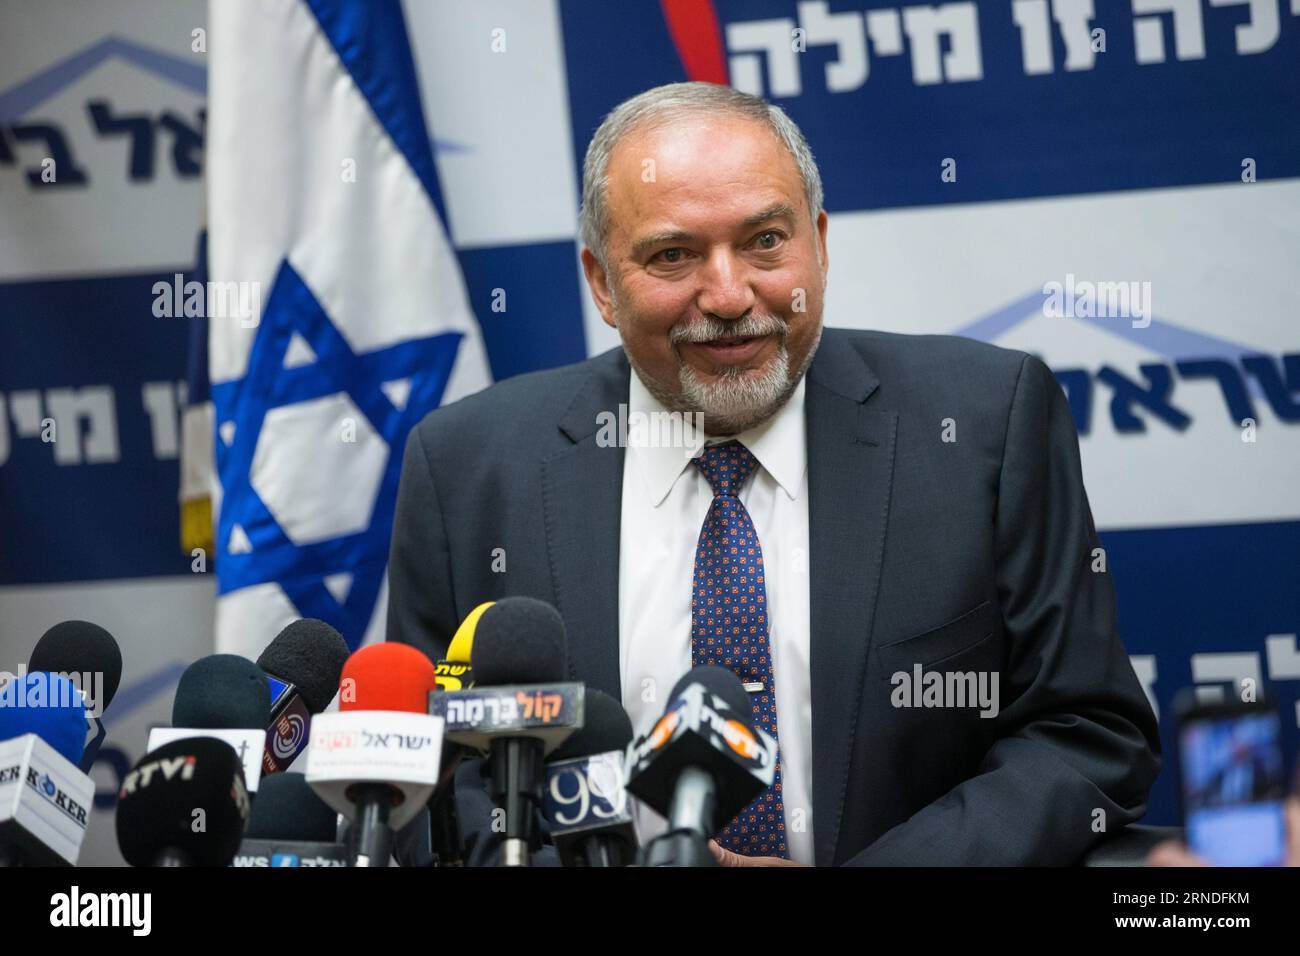 JERUSALEM, May 18, 2016 -- Israeli far-right lawmaker Avigdor Liberman addresses a press conference in Jerusalem May 18, 2016. Prime Minister Benjamin Netanyahu sought to court Avigdor Lieberman on Wednesday amid attempts to enlarge his government and stabilize his ruling coalition. ) (zjy) ISRAEL-COALITION GOVERNMENT-AVIGDOR LIBERMAN JINI PUBLICATIONxNOTxINxCHN   Jerusalem May 18 2016 Israeli Far Right lawmaker Avigdor Liberman addresses a Press Conference in Jerusalem May 18 2016 Prime Ministers Benjamin Netanyahu sought to Court Avigdor Lieberman ON Wednesday Amid attempts to enlarge His Go Stock Photo